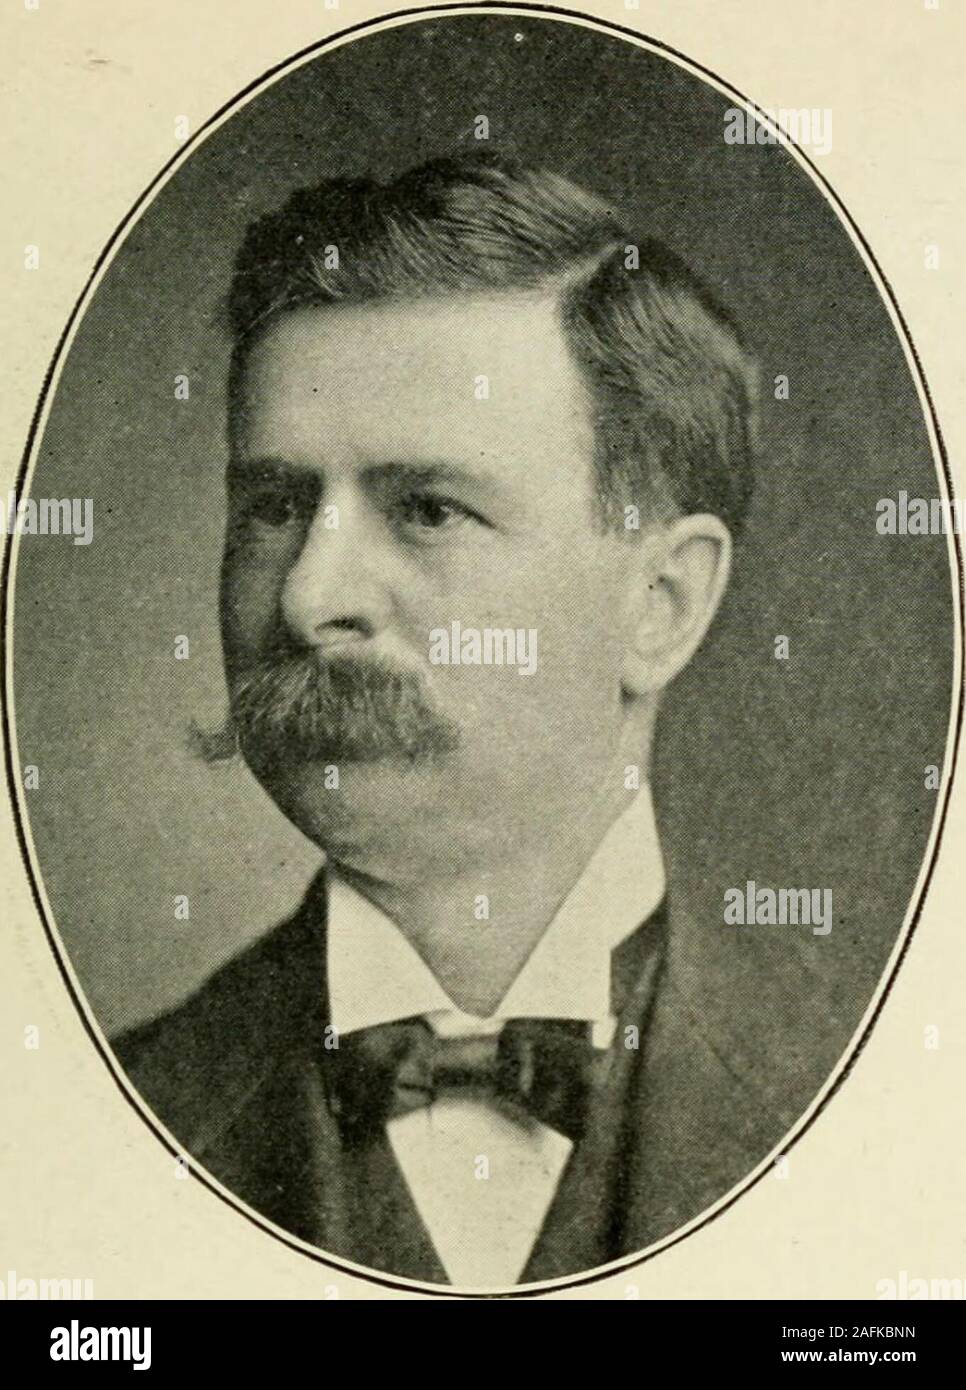 . Men of Minnesota; a collection of the portraits of men prominent in business and professional life in Minnesota. « GEORGE C. BARTON, M. D. MINNEAPOLIS.CLINICAL PROF. GYNAECOLOGY HAMLINE UNIV.MED. DEPT. ; GYNAECOLOGIST TO ST. BAR-NABAS AND SWEDISH HOSPITALS. LYMAN W. DENTON, PH. D., M. D. MINNEAPOLIS. EX-PROE, OF POLITICAL ECONOMY NORTHWESTERN CHRISTIAN college; AUTHOR AND POET. MEN OF MINNESOTA. 209. Stock Photo